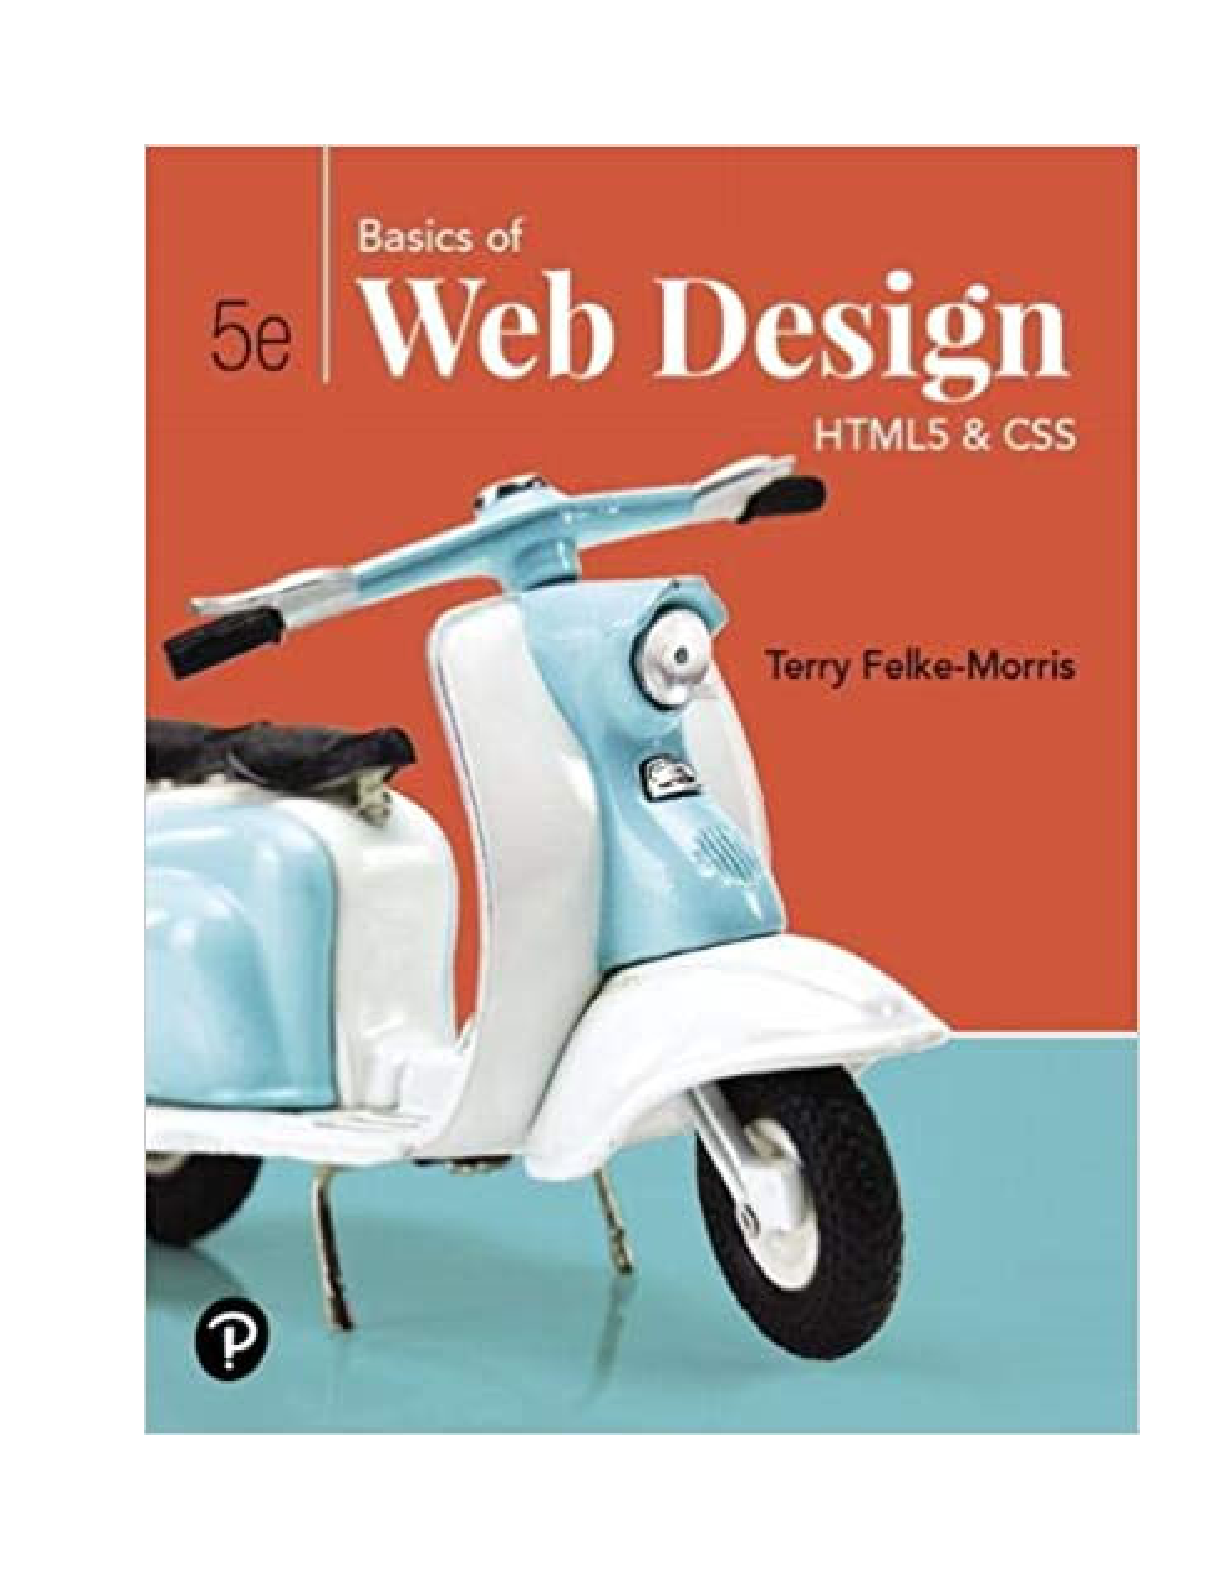 ebook-for-new-perspectives-on-html-and-css-comprehensive-6th-edition-by-patrick-m-carey